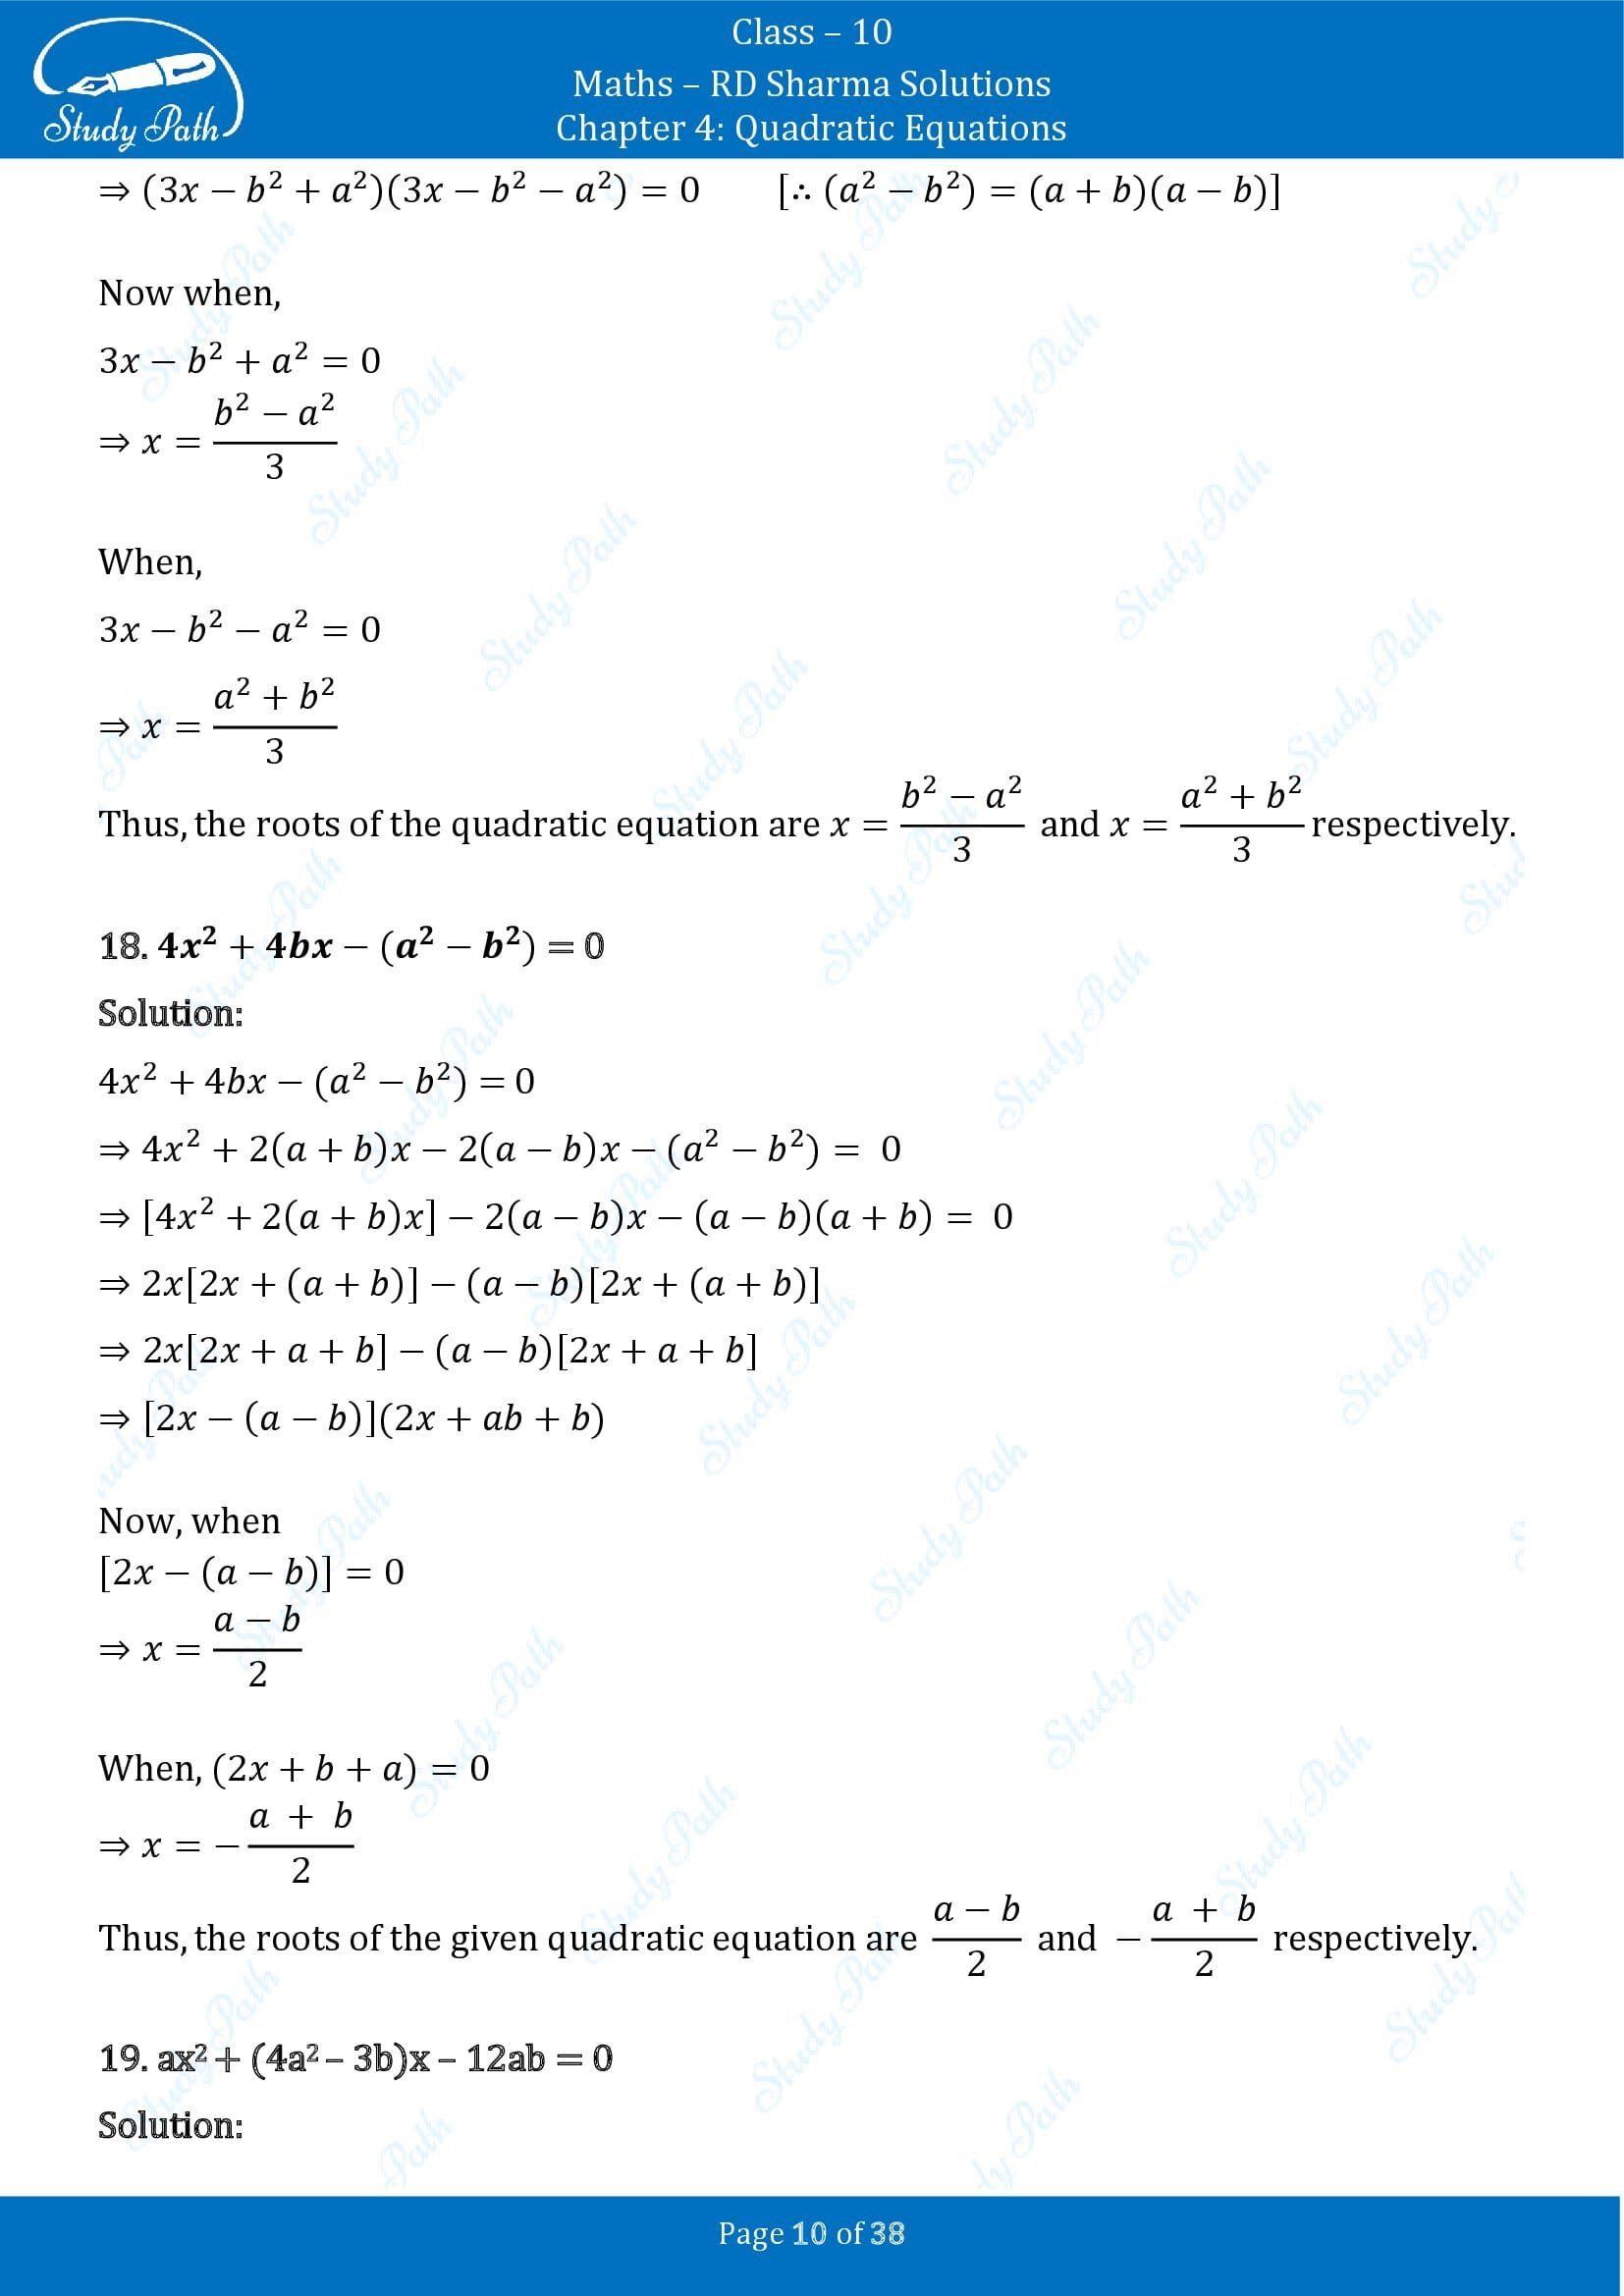 RD Sharma Solutions Class 10 Chapter 4 Quadratic Equations Exercise 4.3 00010